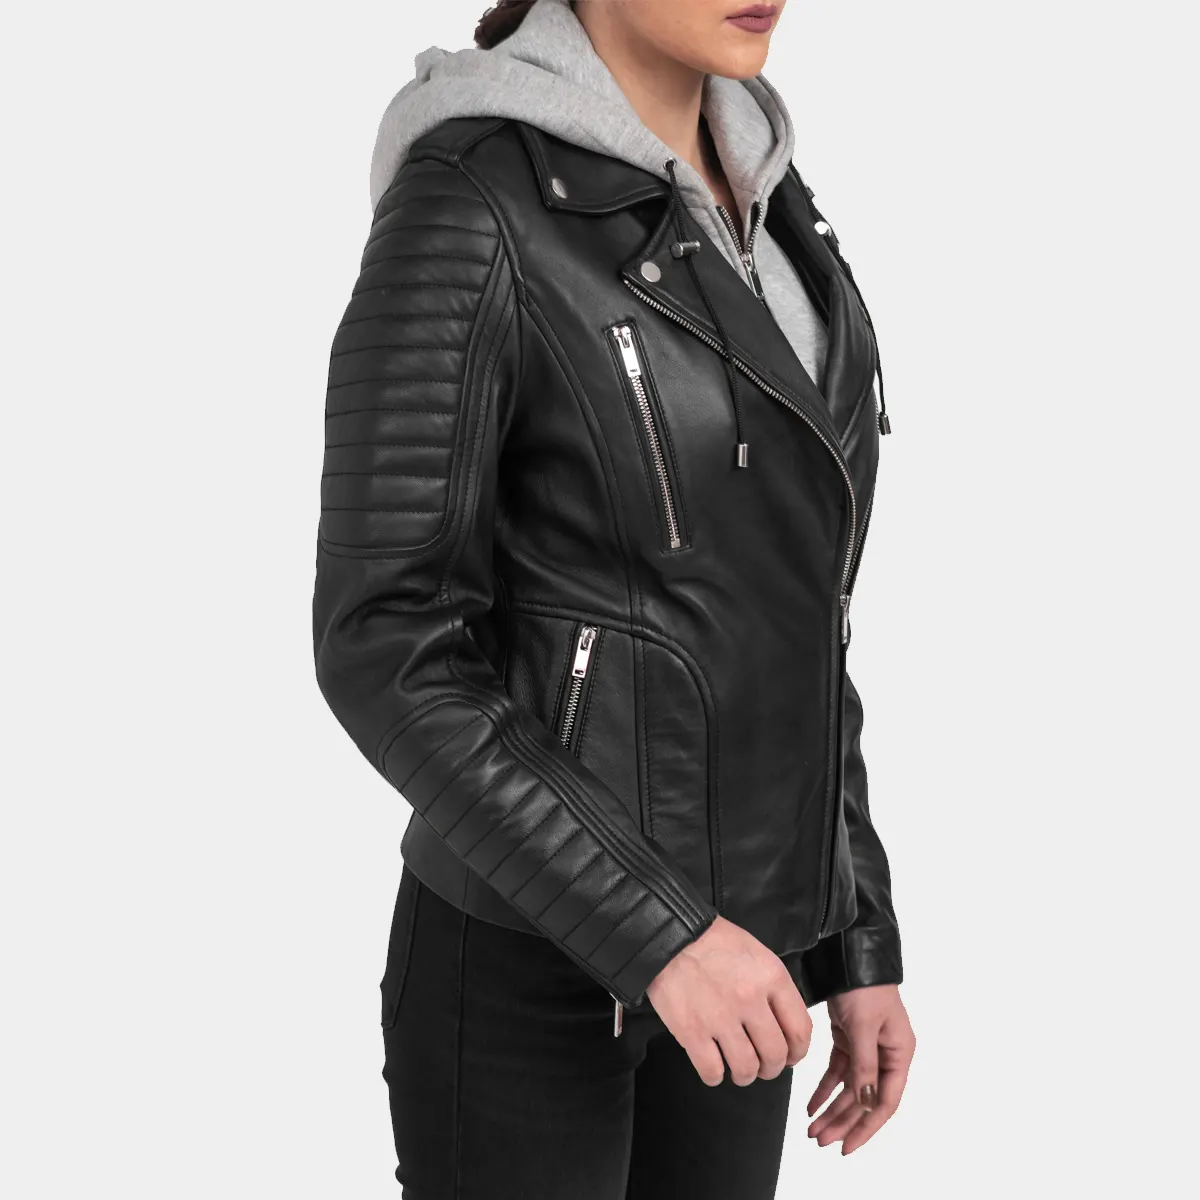 Black leather jacket for women with removeable hood